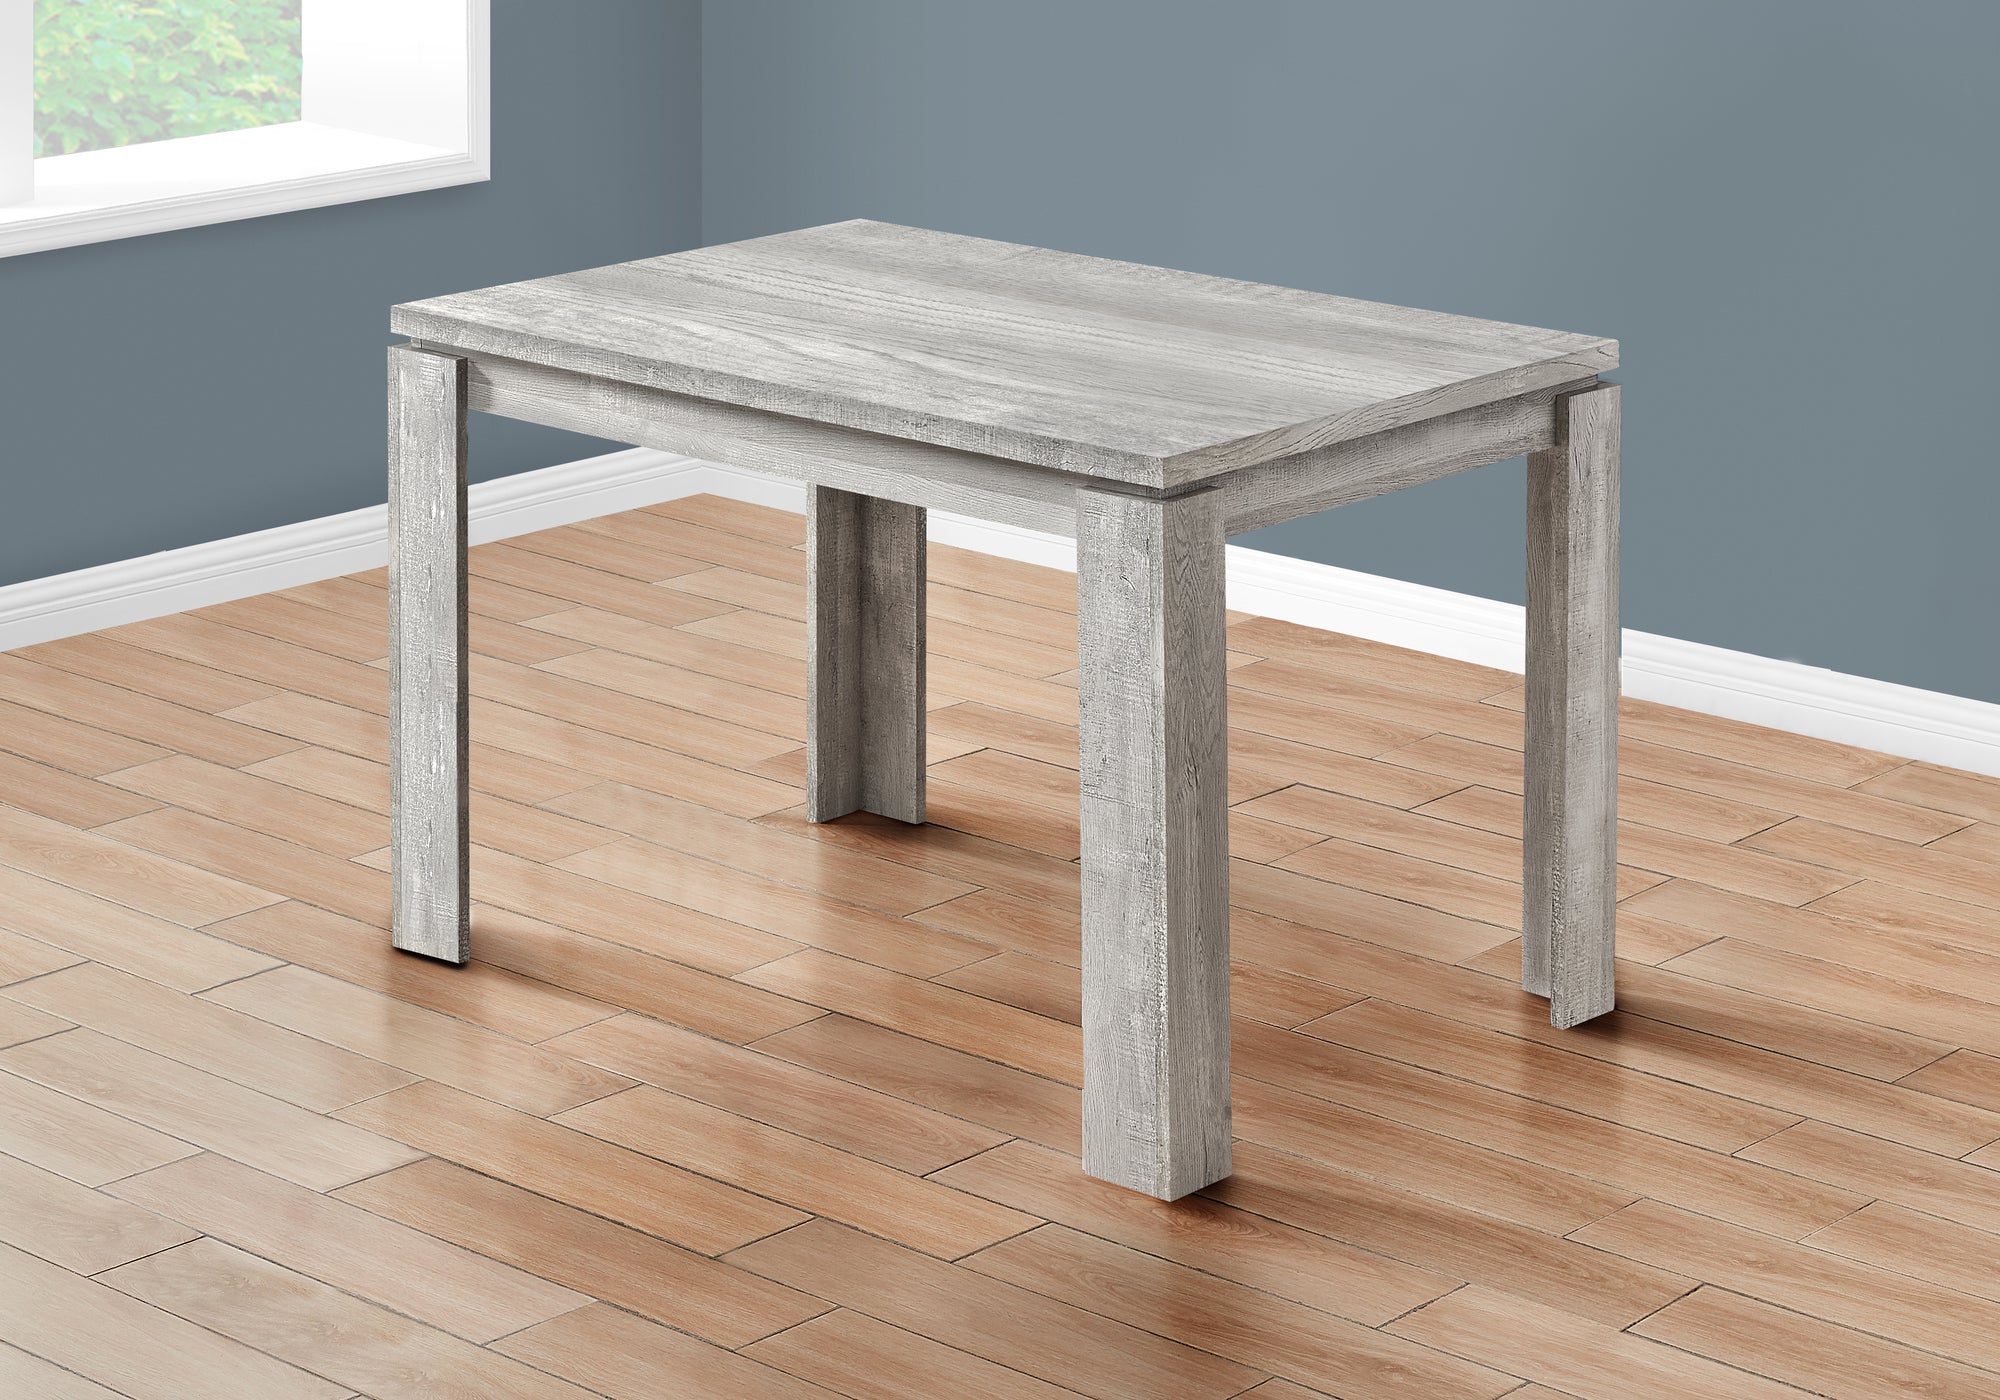 MN-731164    Dining Table, 48" Rectangular, Kitchen, Dining Room, Laminate, Grey Reclaimed Wood Look, Black, Contemporary, Modern